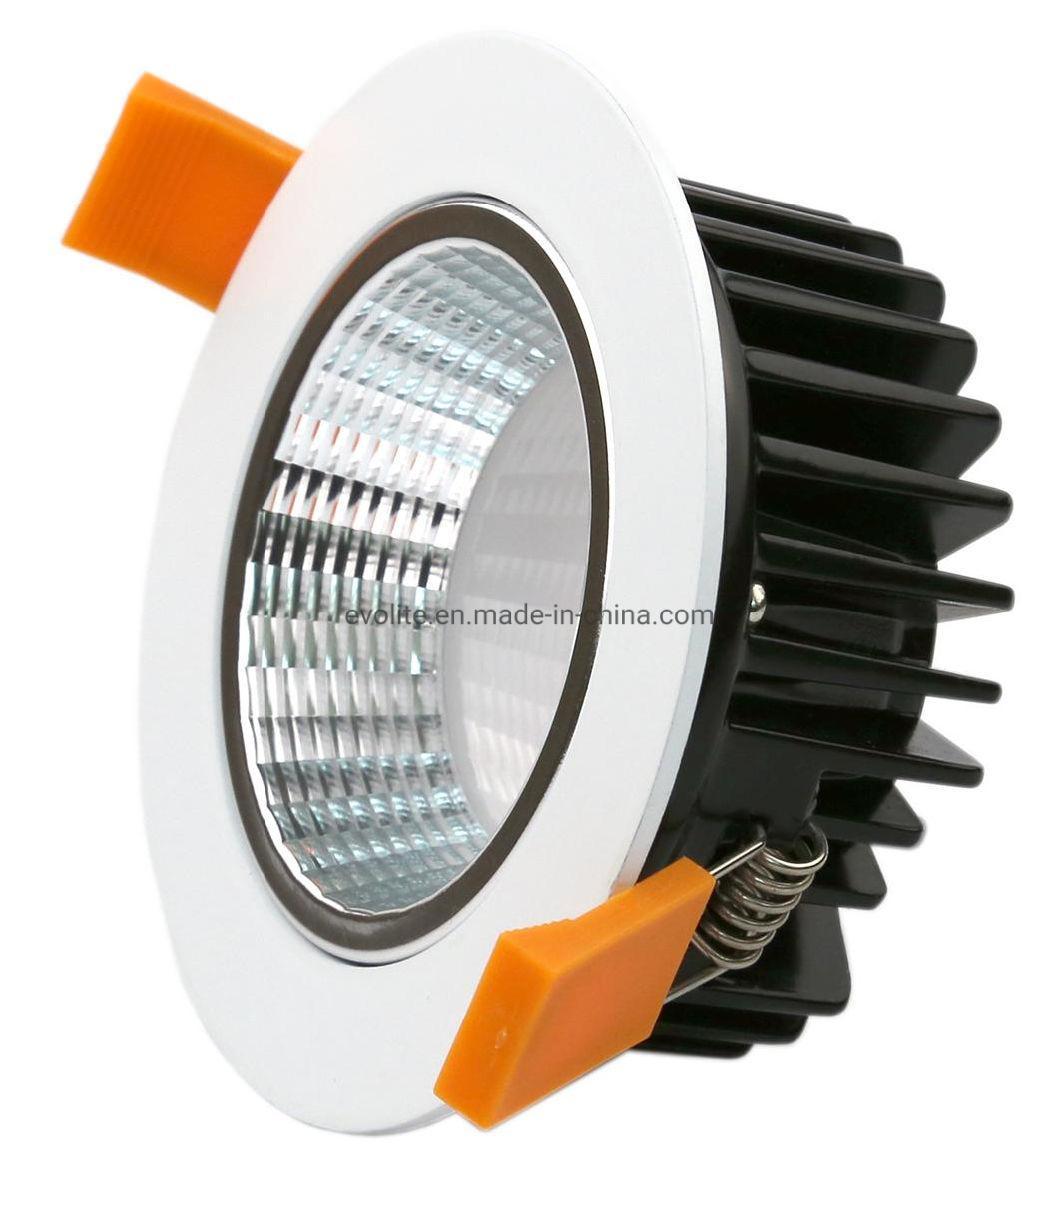 Aluminum Cut out 90mm LED Downlight 10W Downlight with Dimmable Phase Cut X4b